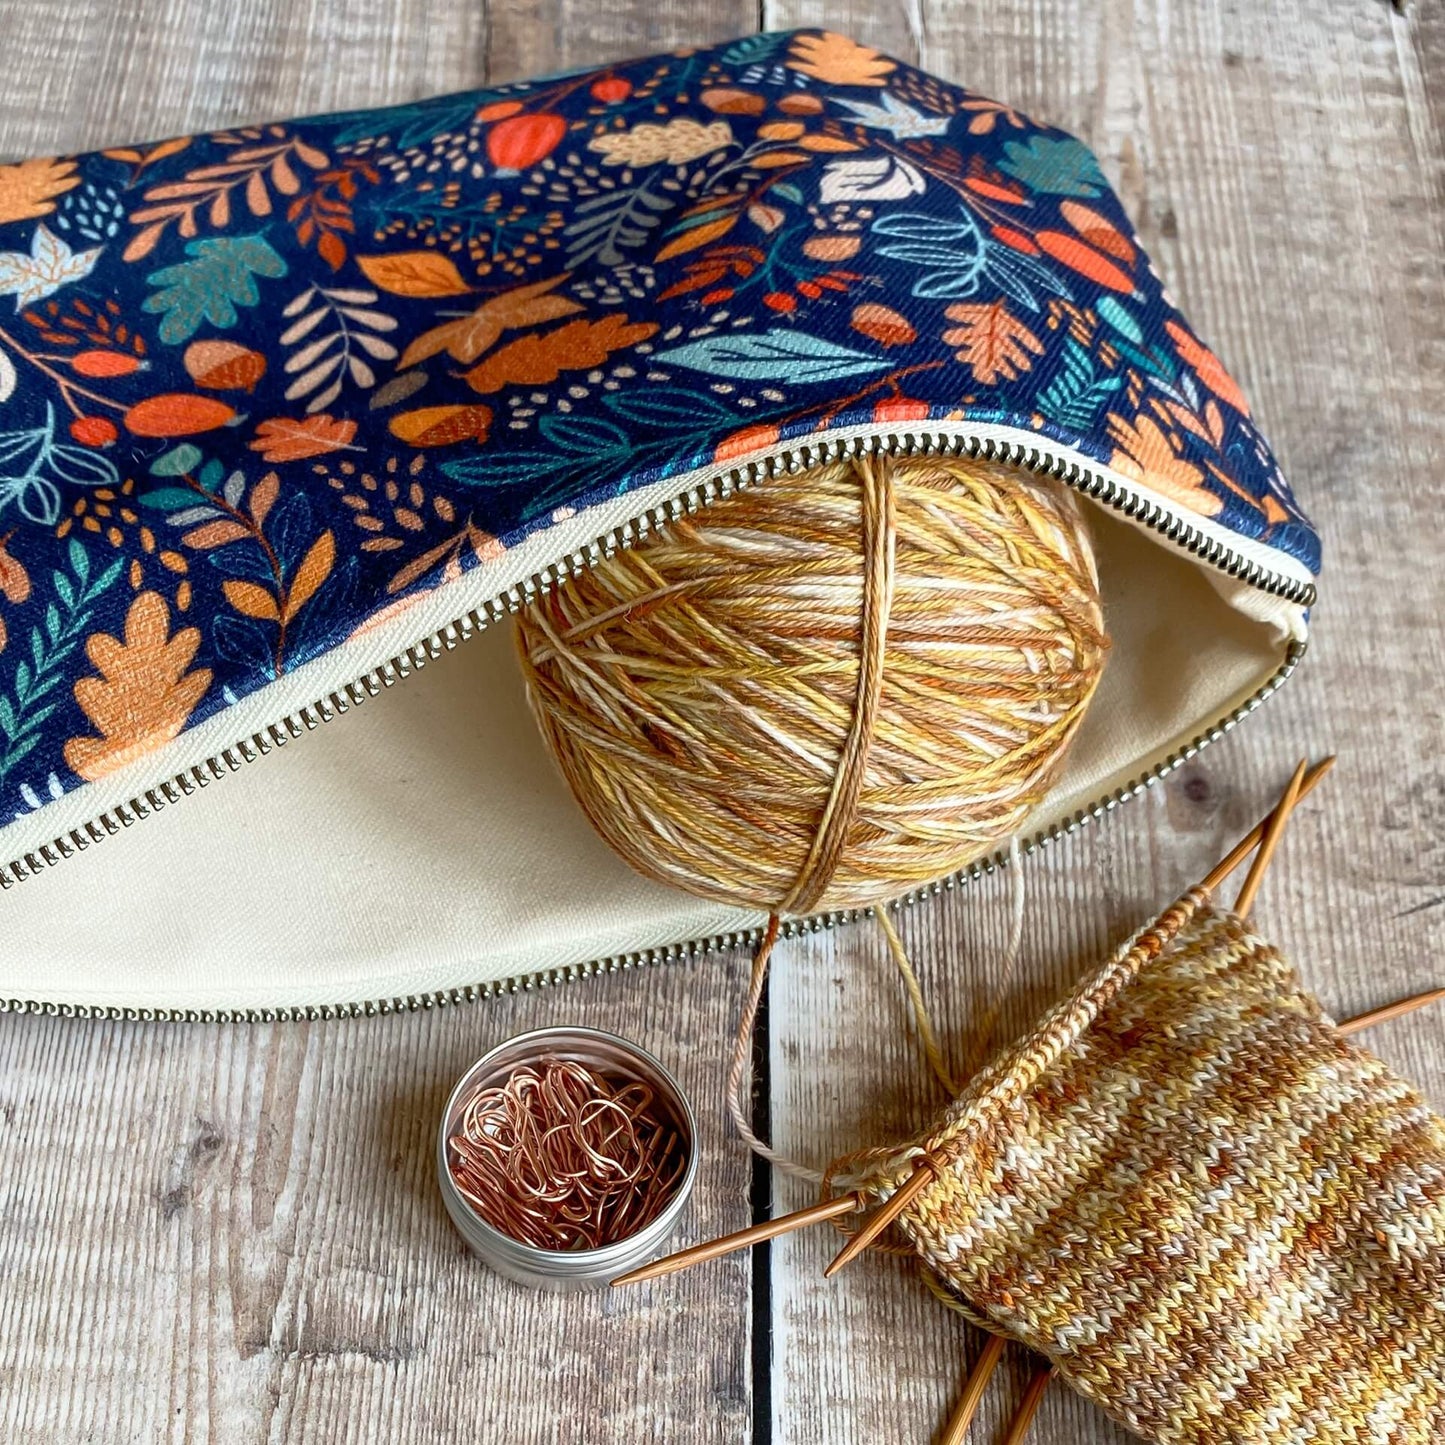 A zipped pouch lies open. In the opening a ball of yarn in brown tones sits. The yarn is attached to an in progress knitting project. Also next to the pouch is a tin of stitch markers. 